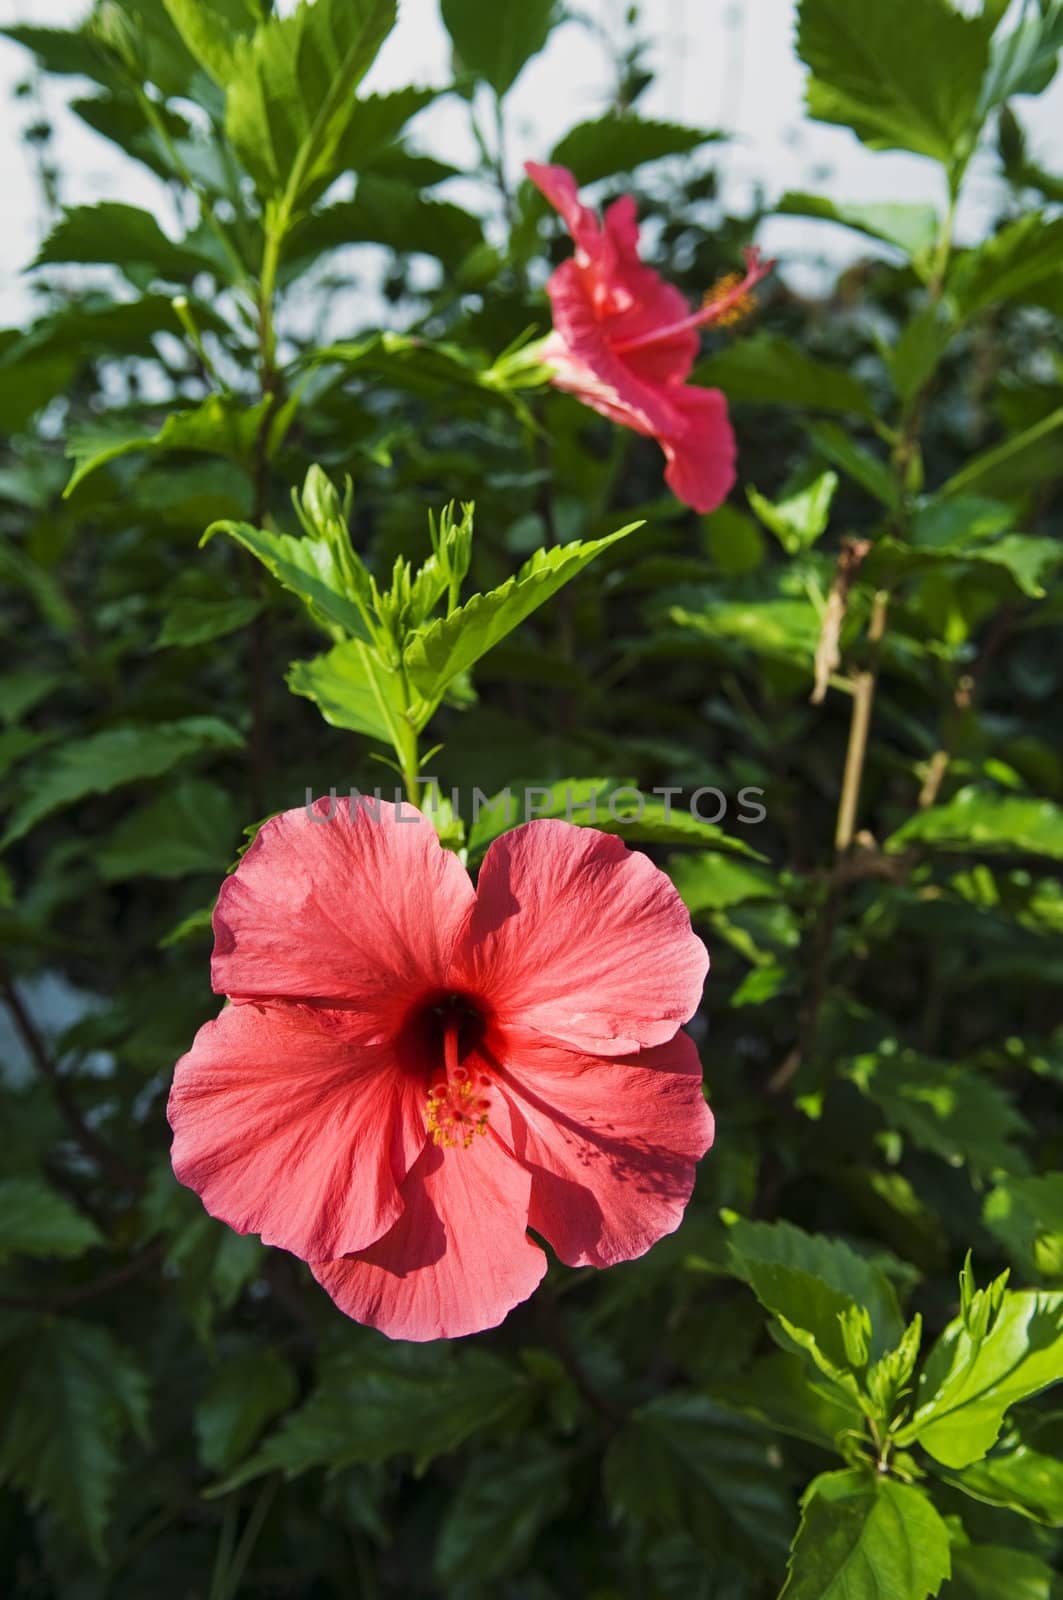 Red hibiscus flower over lush green foliage